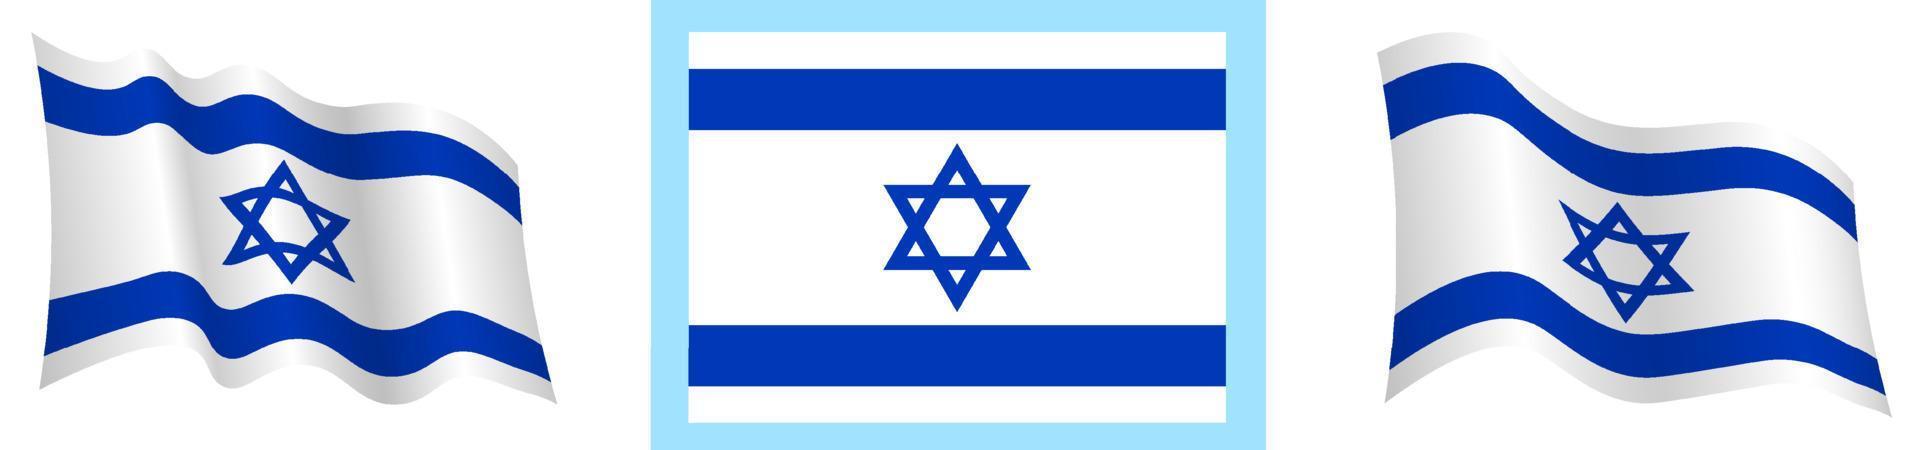 israel flag in static position and in motion, developing in wind in exact colors and sizes, on white background vector